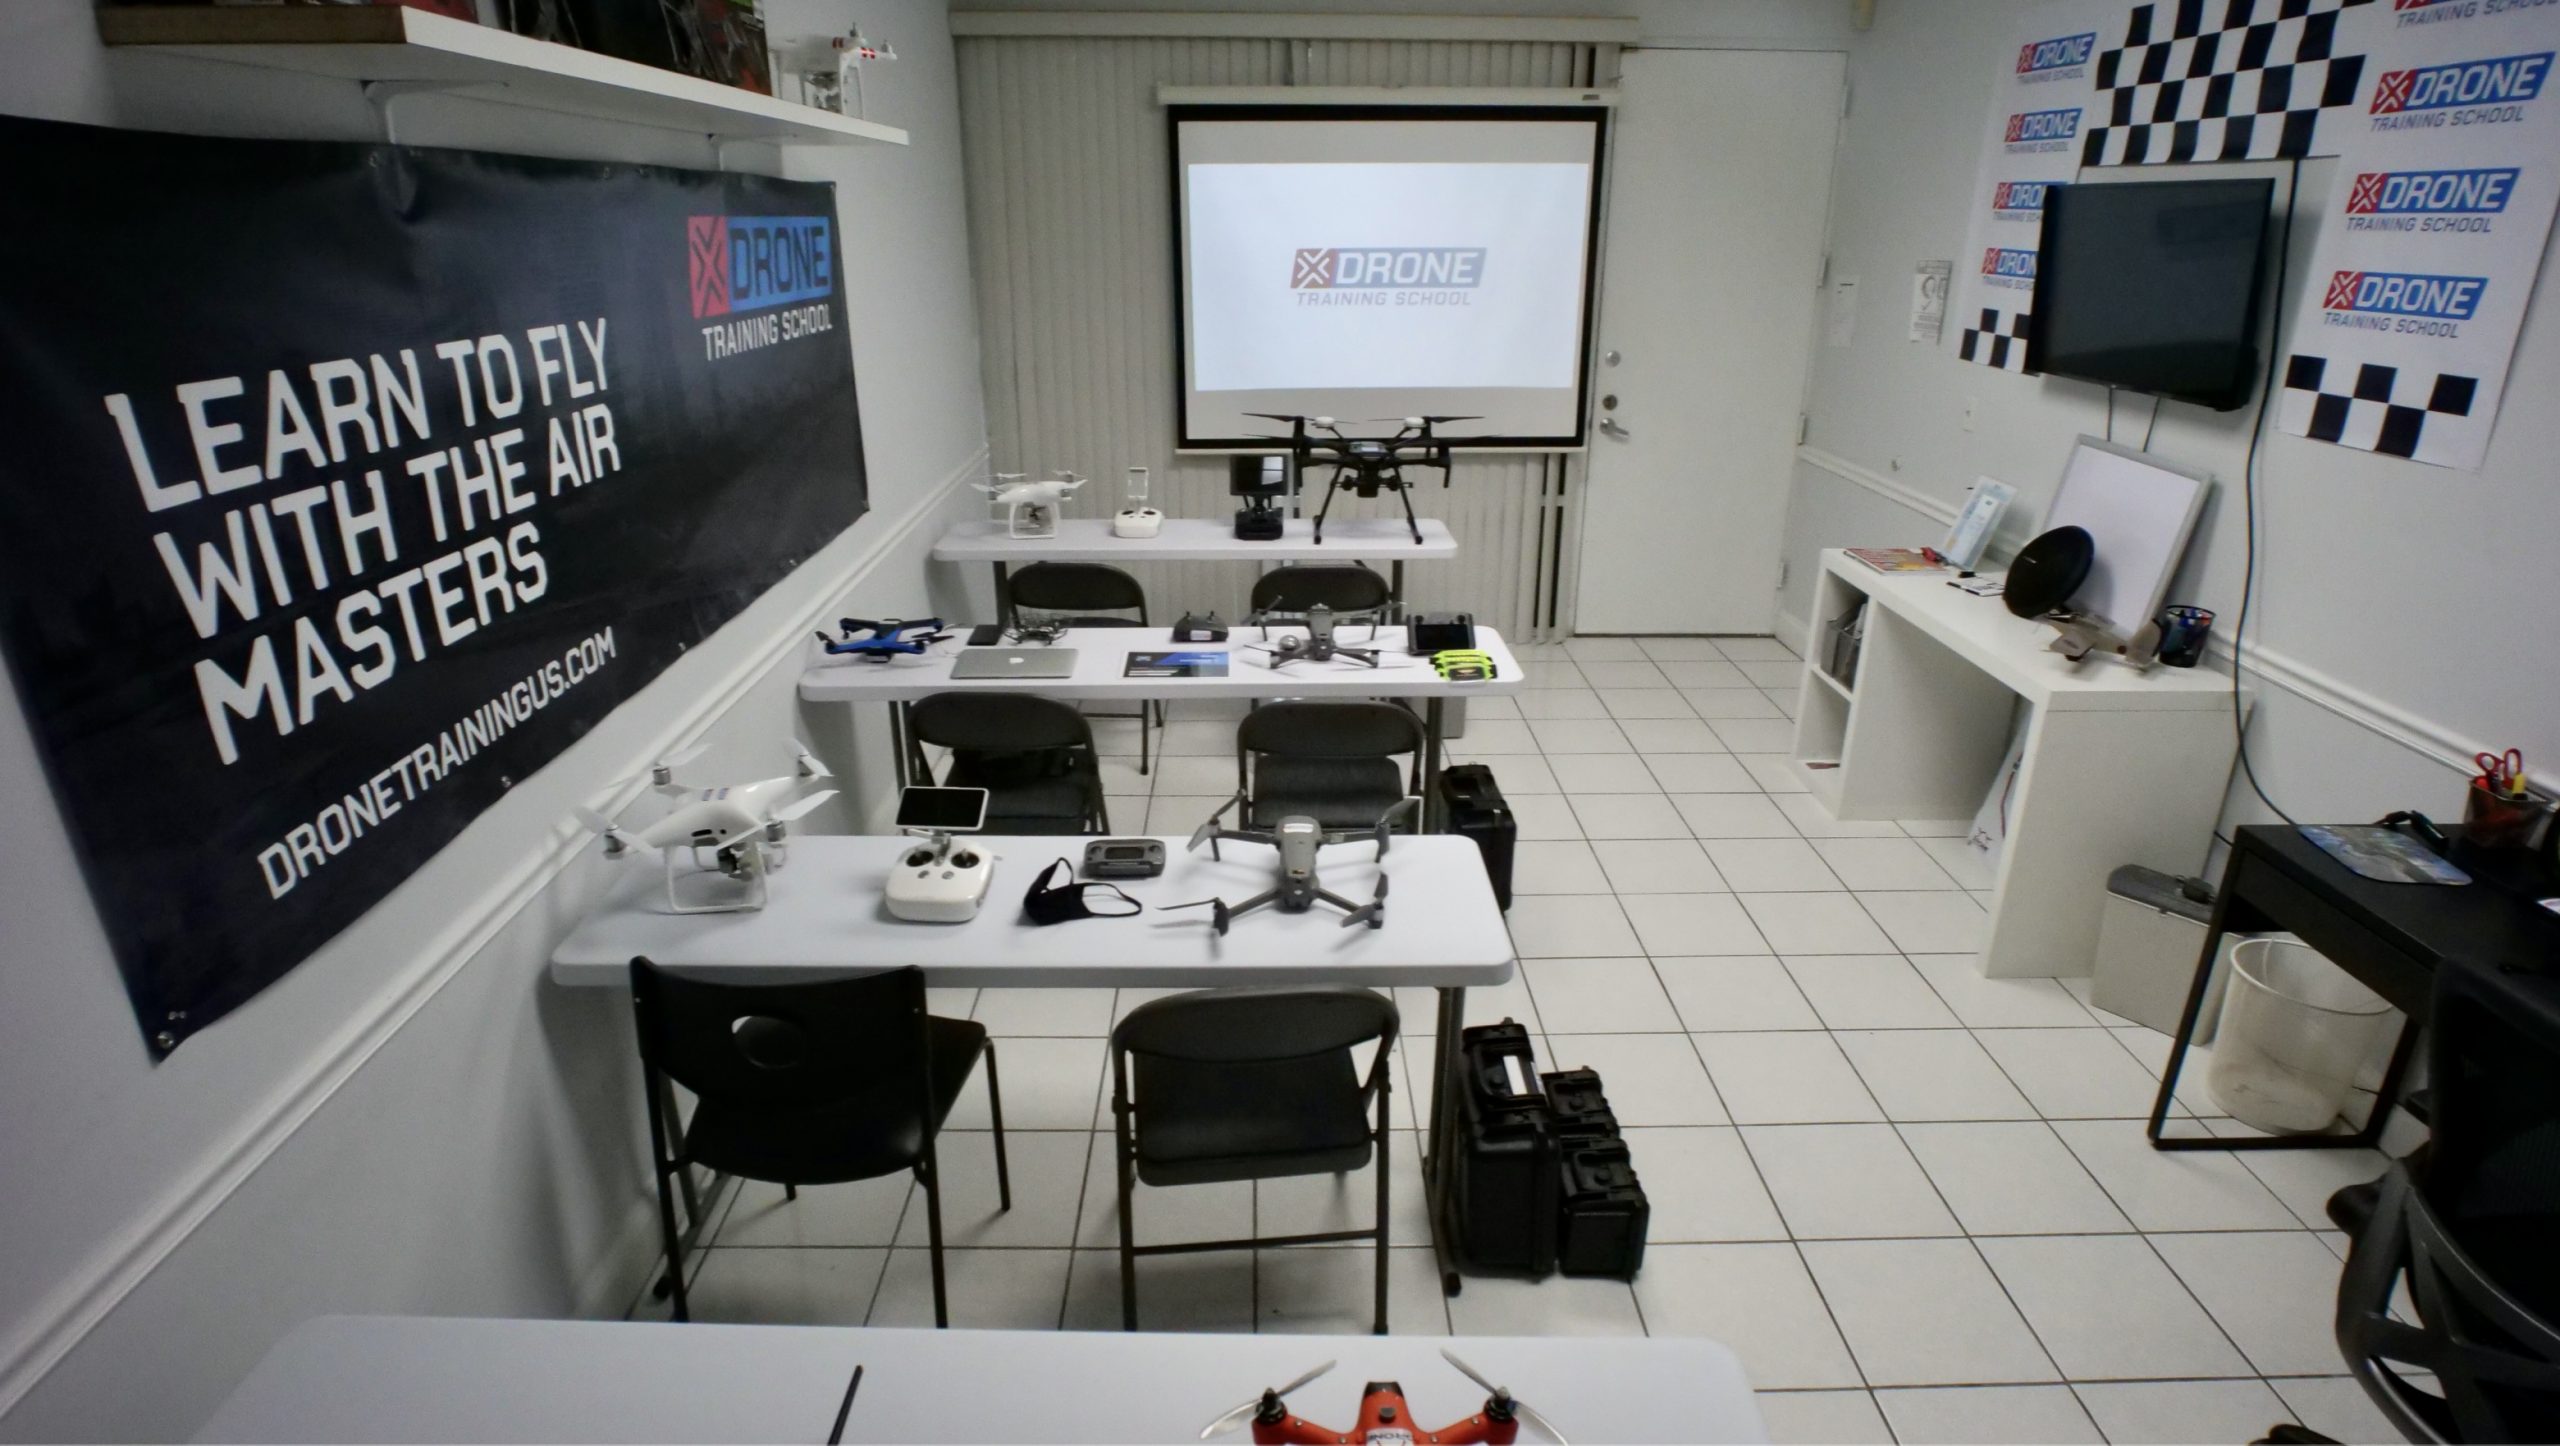 Drone Training School class room scaled